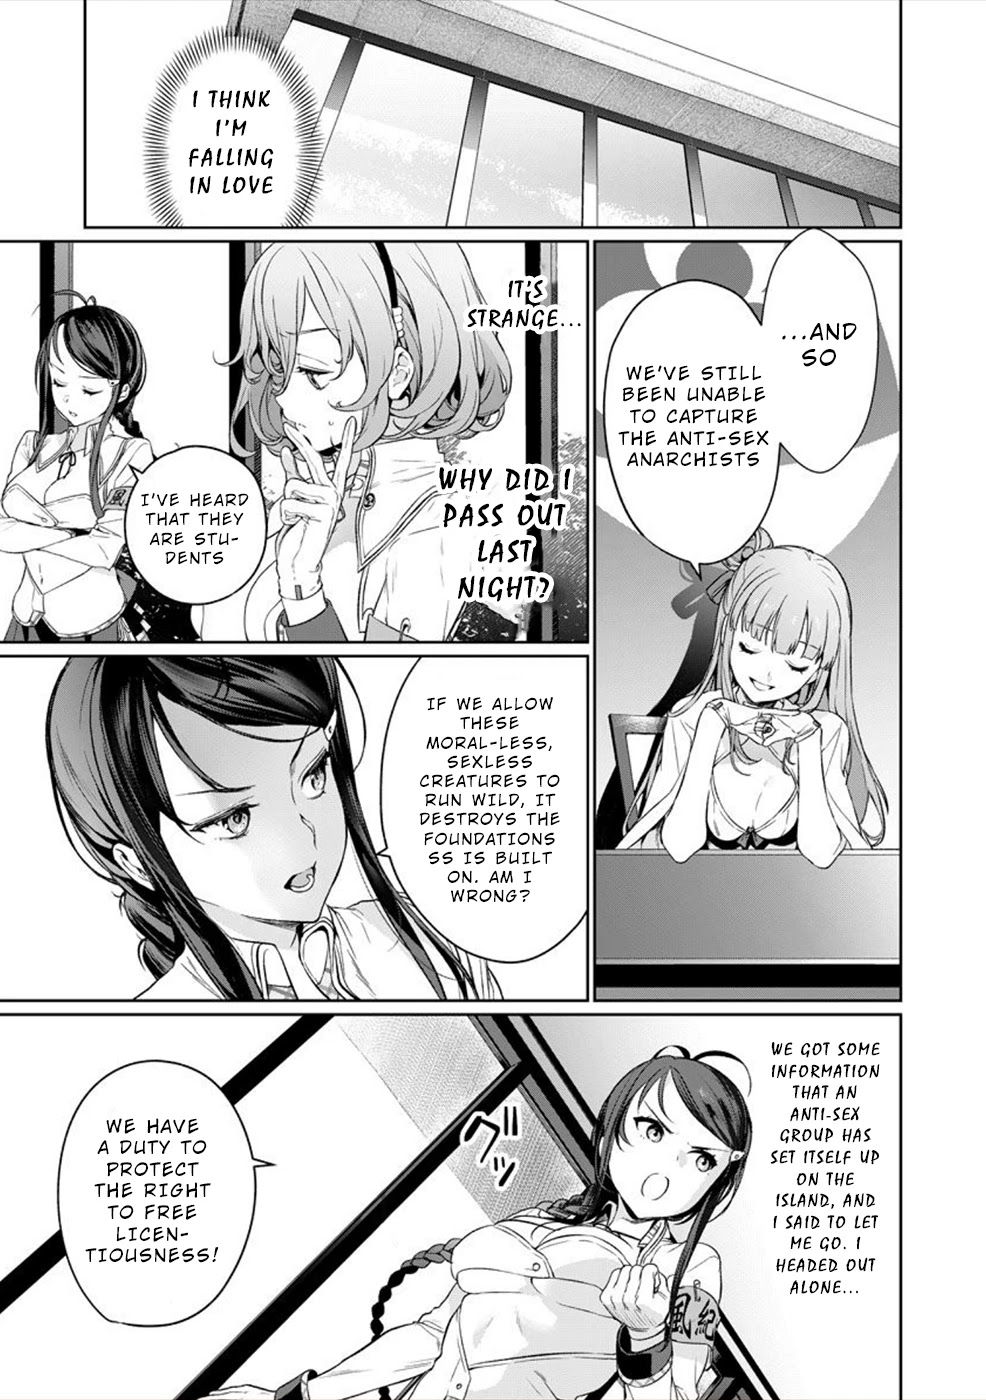 Nukita L - I Live On An Island Straight From A Fap Game, What On Earth Should I Do? Chapter 3 #28